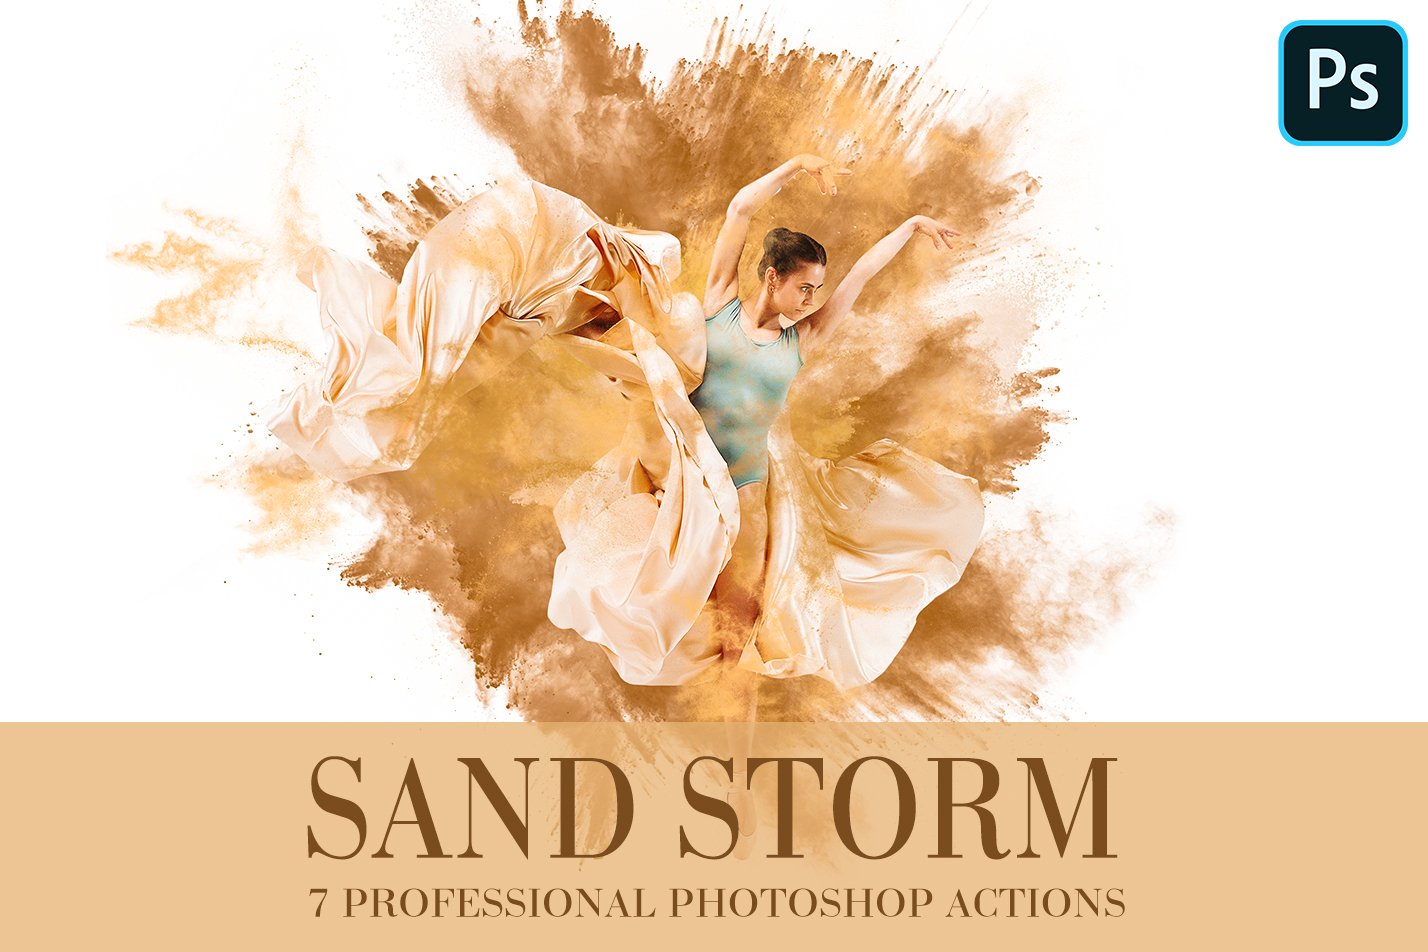 Photoshop Actions - Sand Stormcover image.